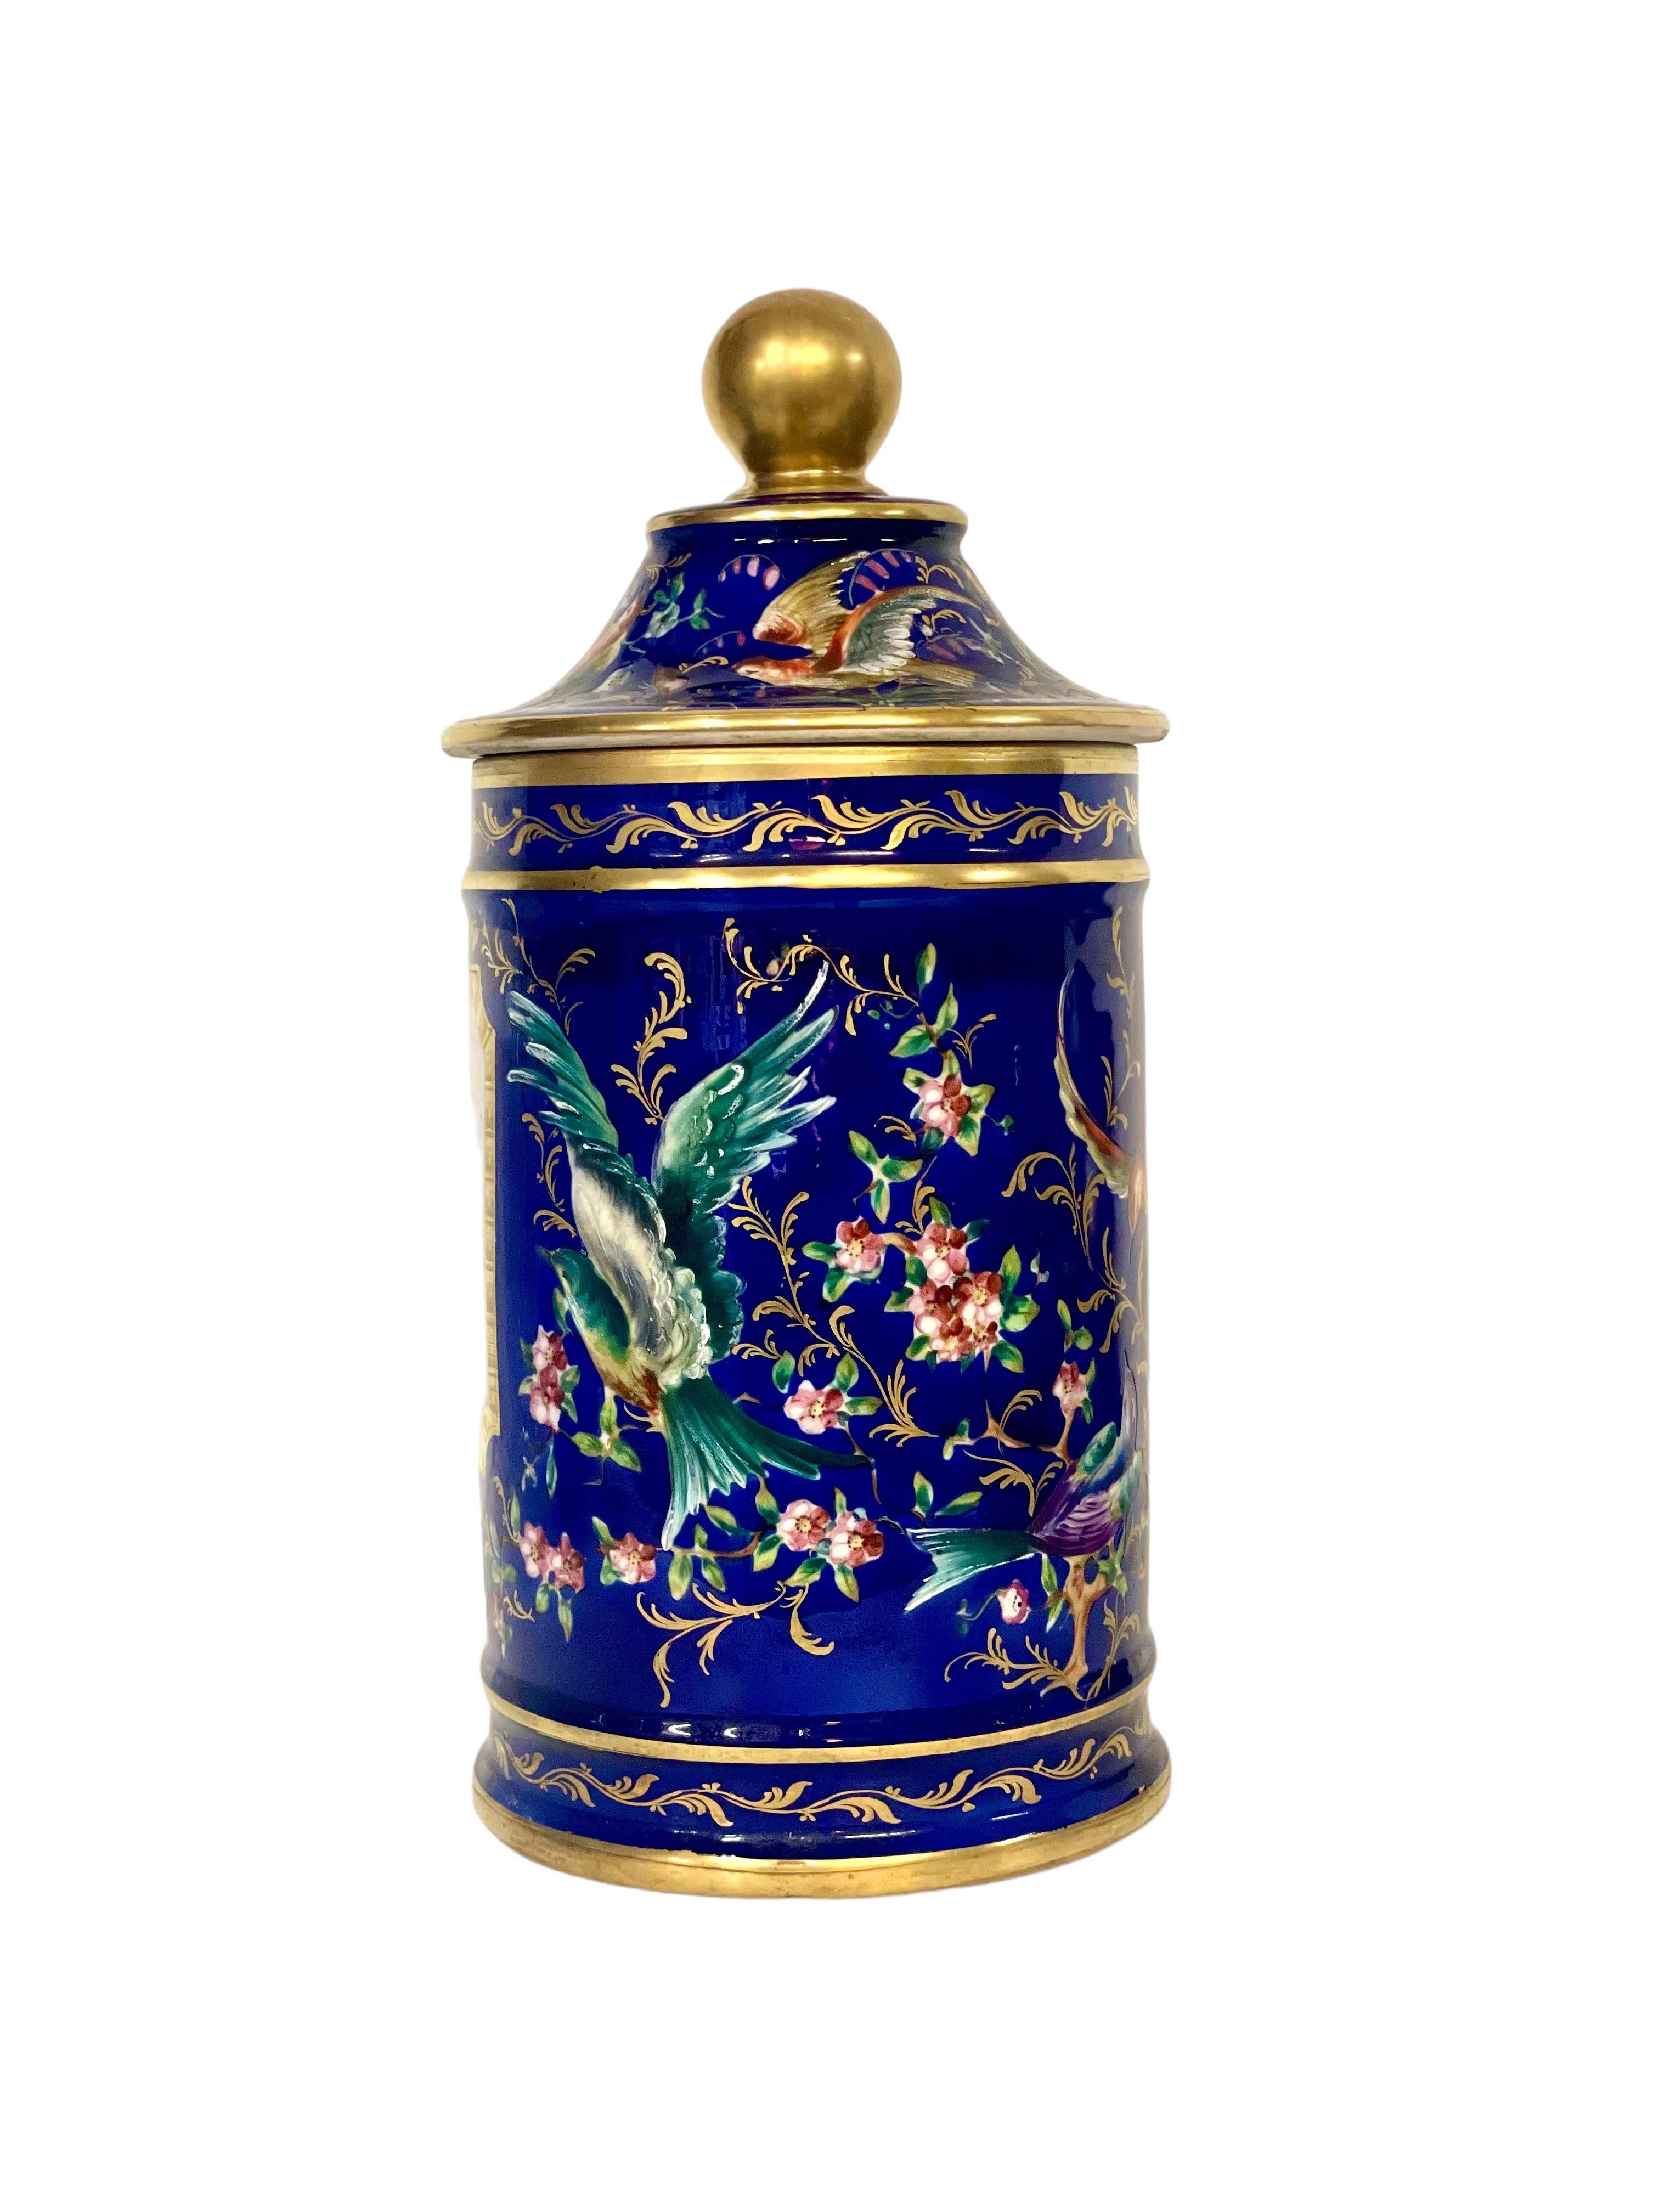 Gilt 1810s Large Lidded Porcelain Apothecary Jar, 1st Empire Period For Sale